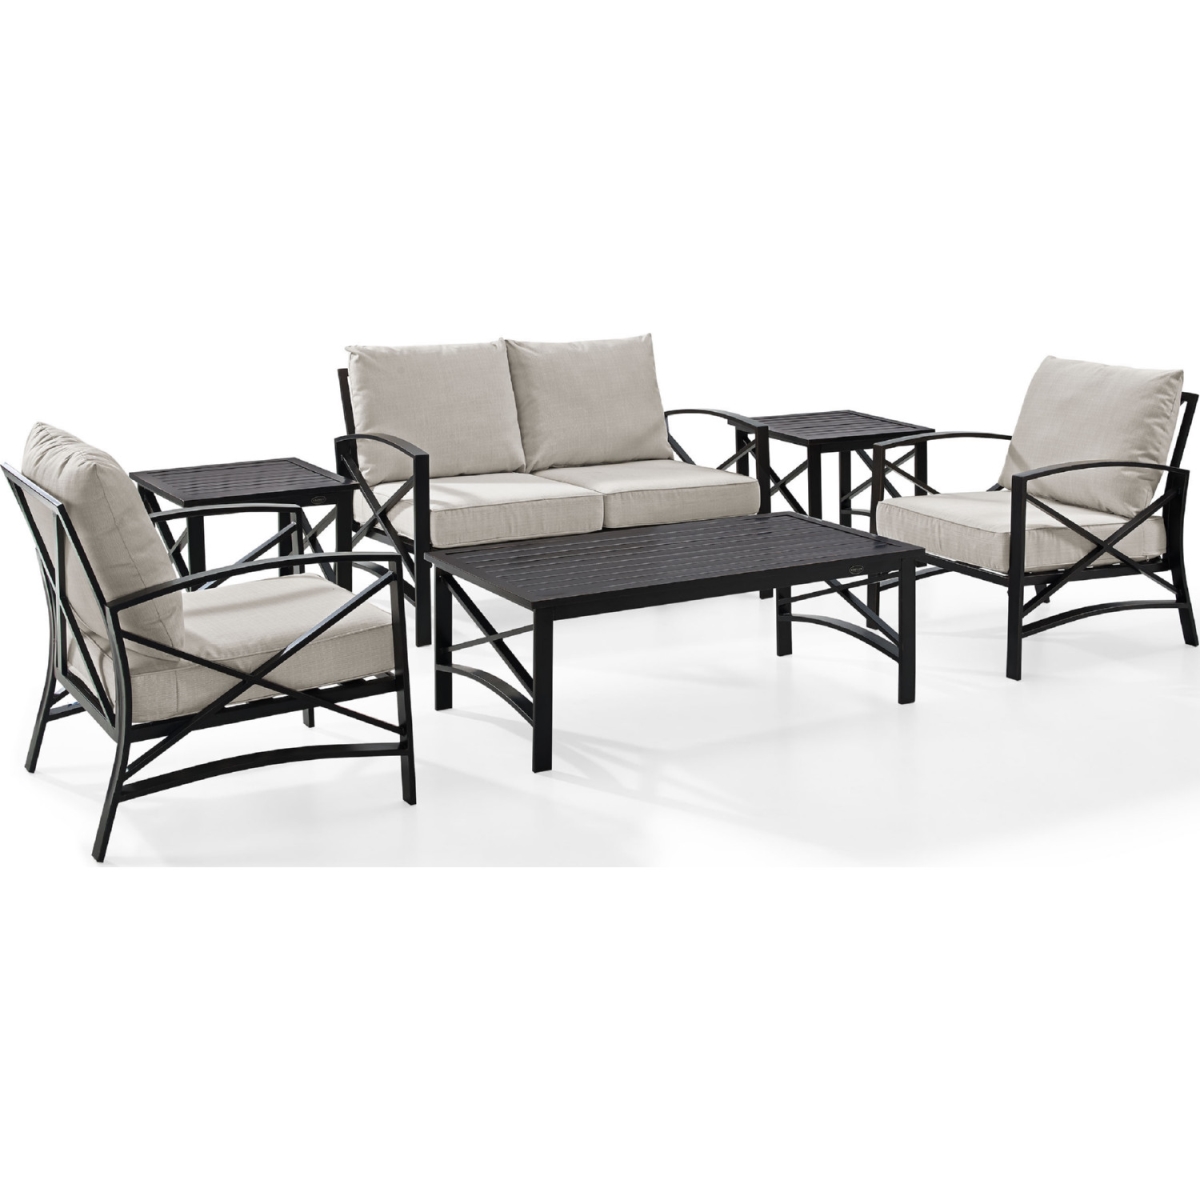 Crosley KO60017BZ-OL 6 Piece Kaplan Outdoor Seating Set with Oatmeal Cushion - Loveseat, Two Chairs, Two Side Tables, Coffee Table